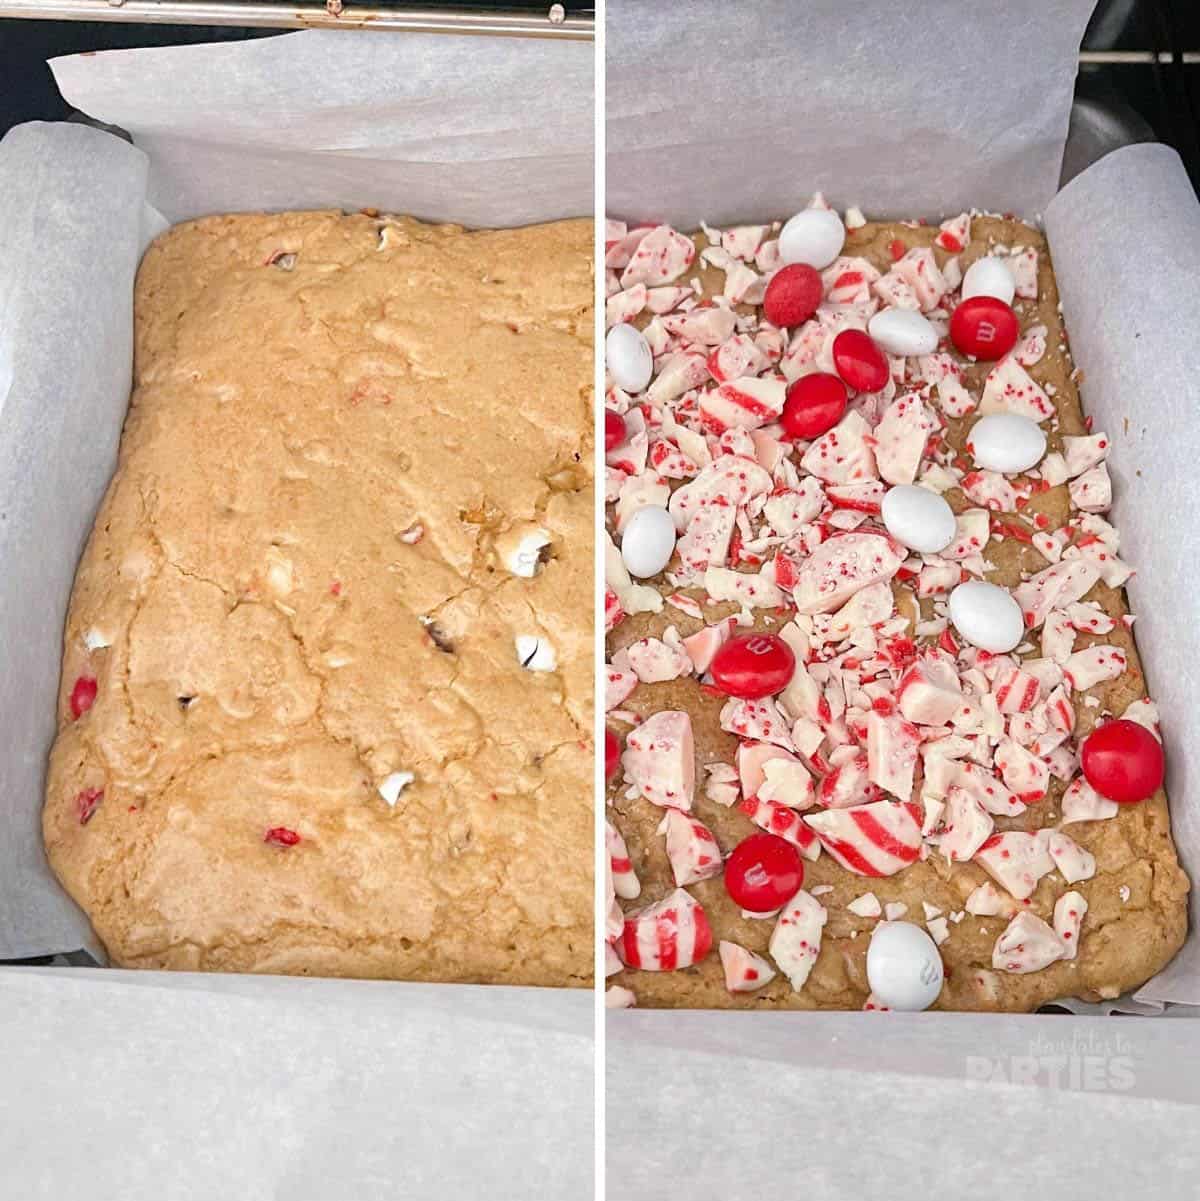 White chocolate peppermint blondies are a must-make holiday treat, with the perfect balance of peppermint flavor and dense, chewy texture.